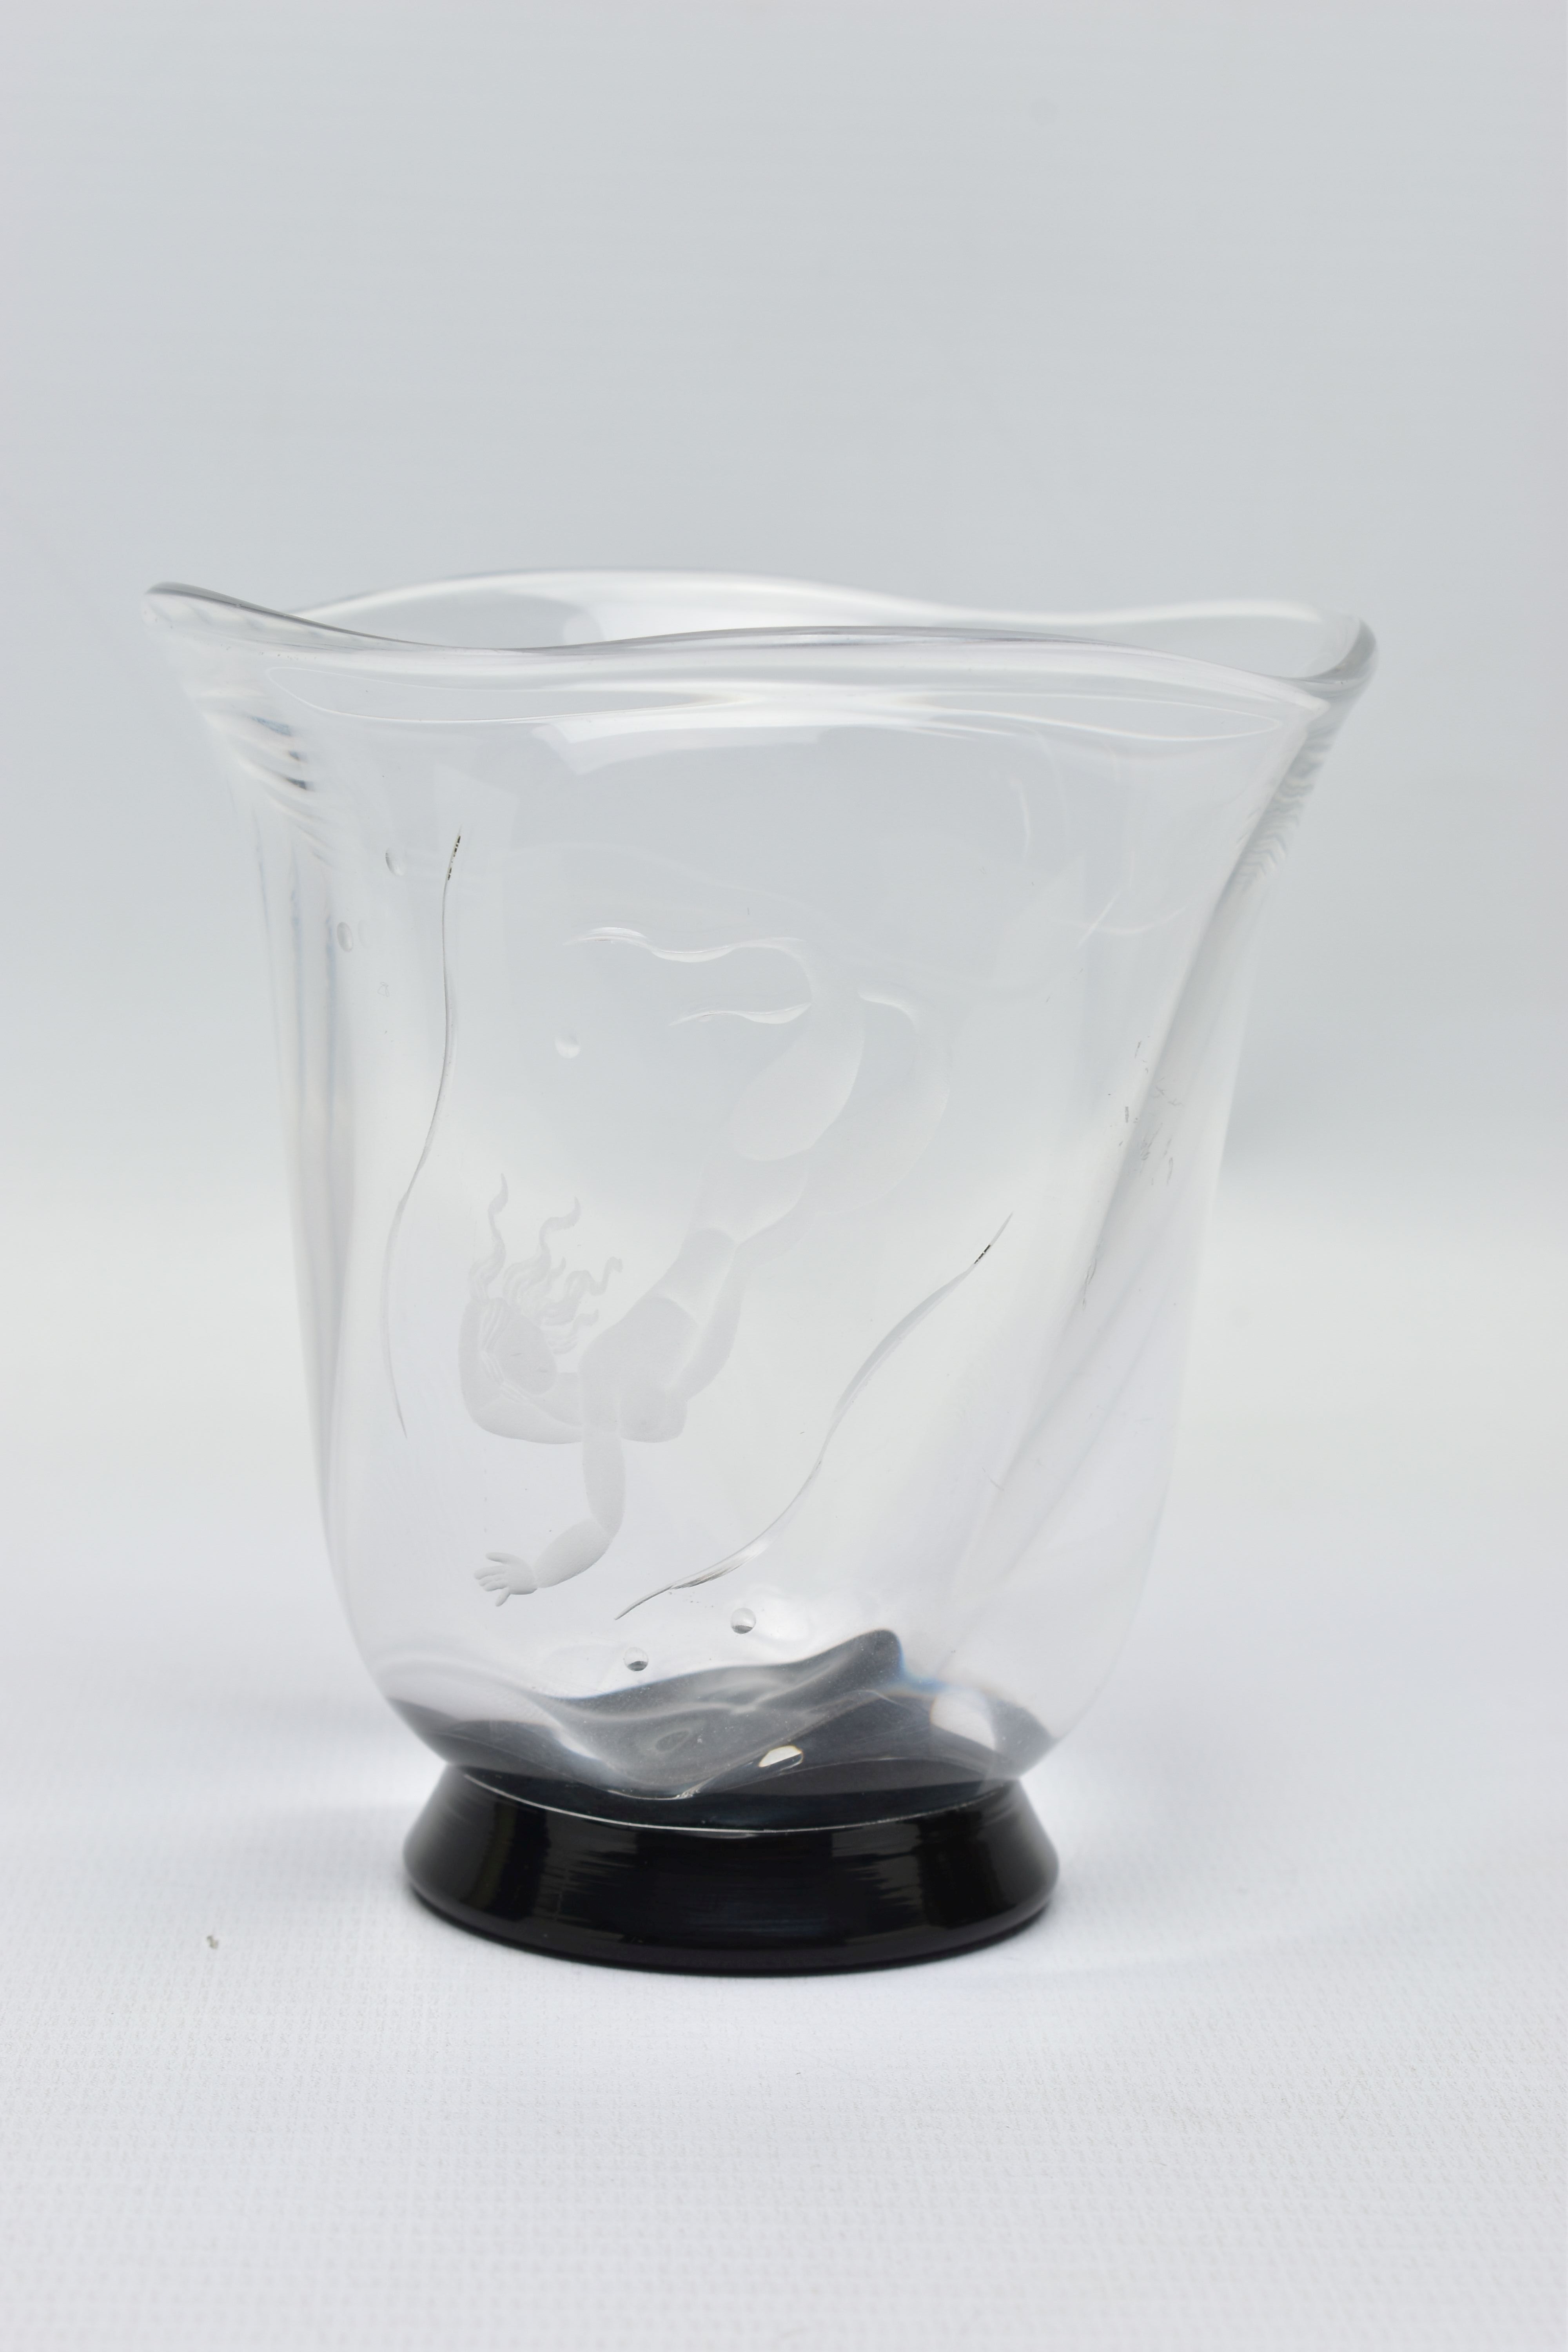 SIMON GATE (1883-1945) FOR ORREFORS, A WRYTHERN FORM VASE WITH CLEAR GLASS BODY AND BLACK FOOT